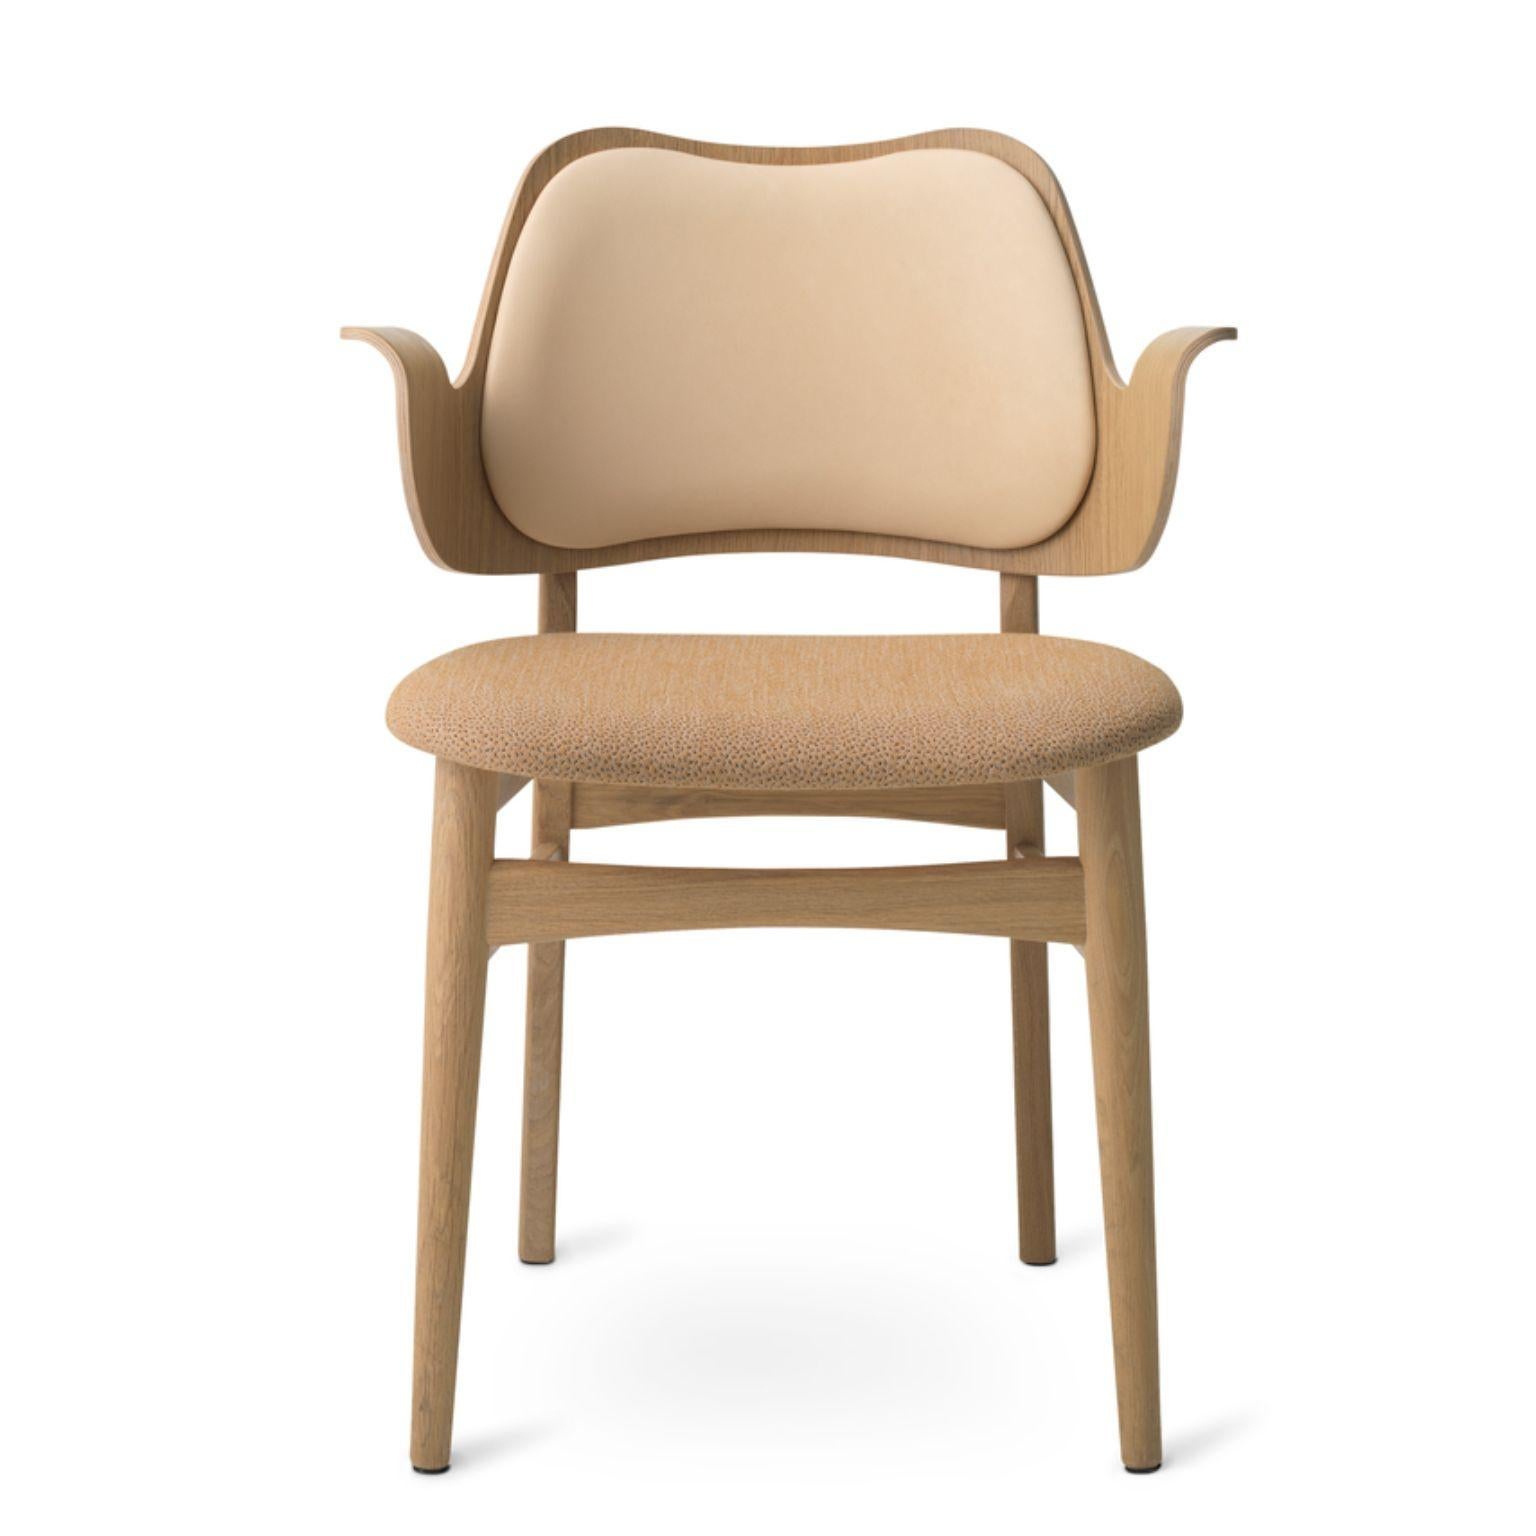 Gesture lounge chair sprinkles nature latte oak by Warm Nordic
Dimensions: D59 x W60 x H 73 cm
Material: White oiled solid oak base, Veneer seat and back, Textile or leather upholstery.
Weight: 8 kg
Also available in different colours and